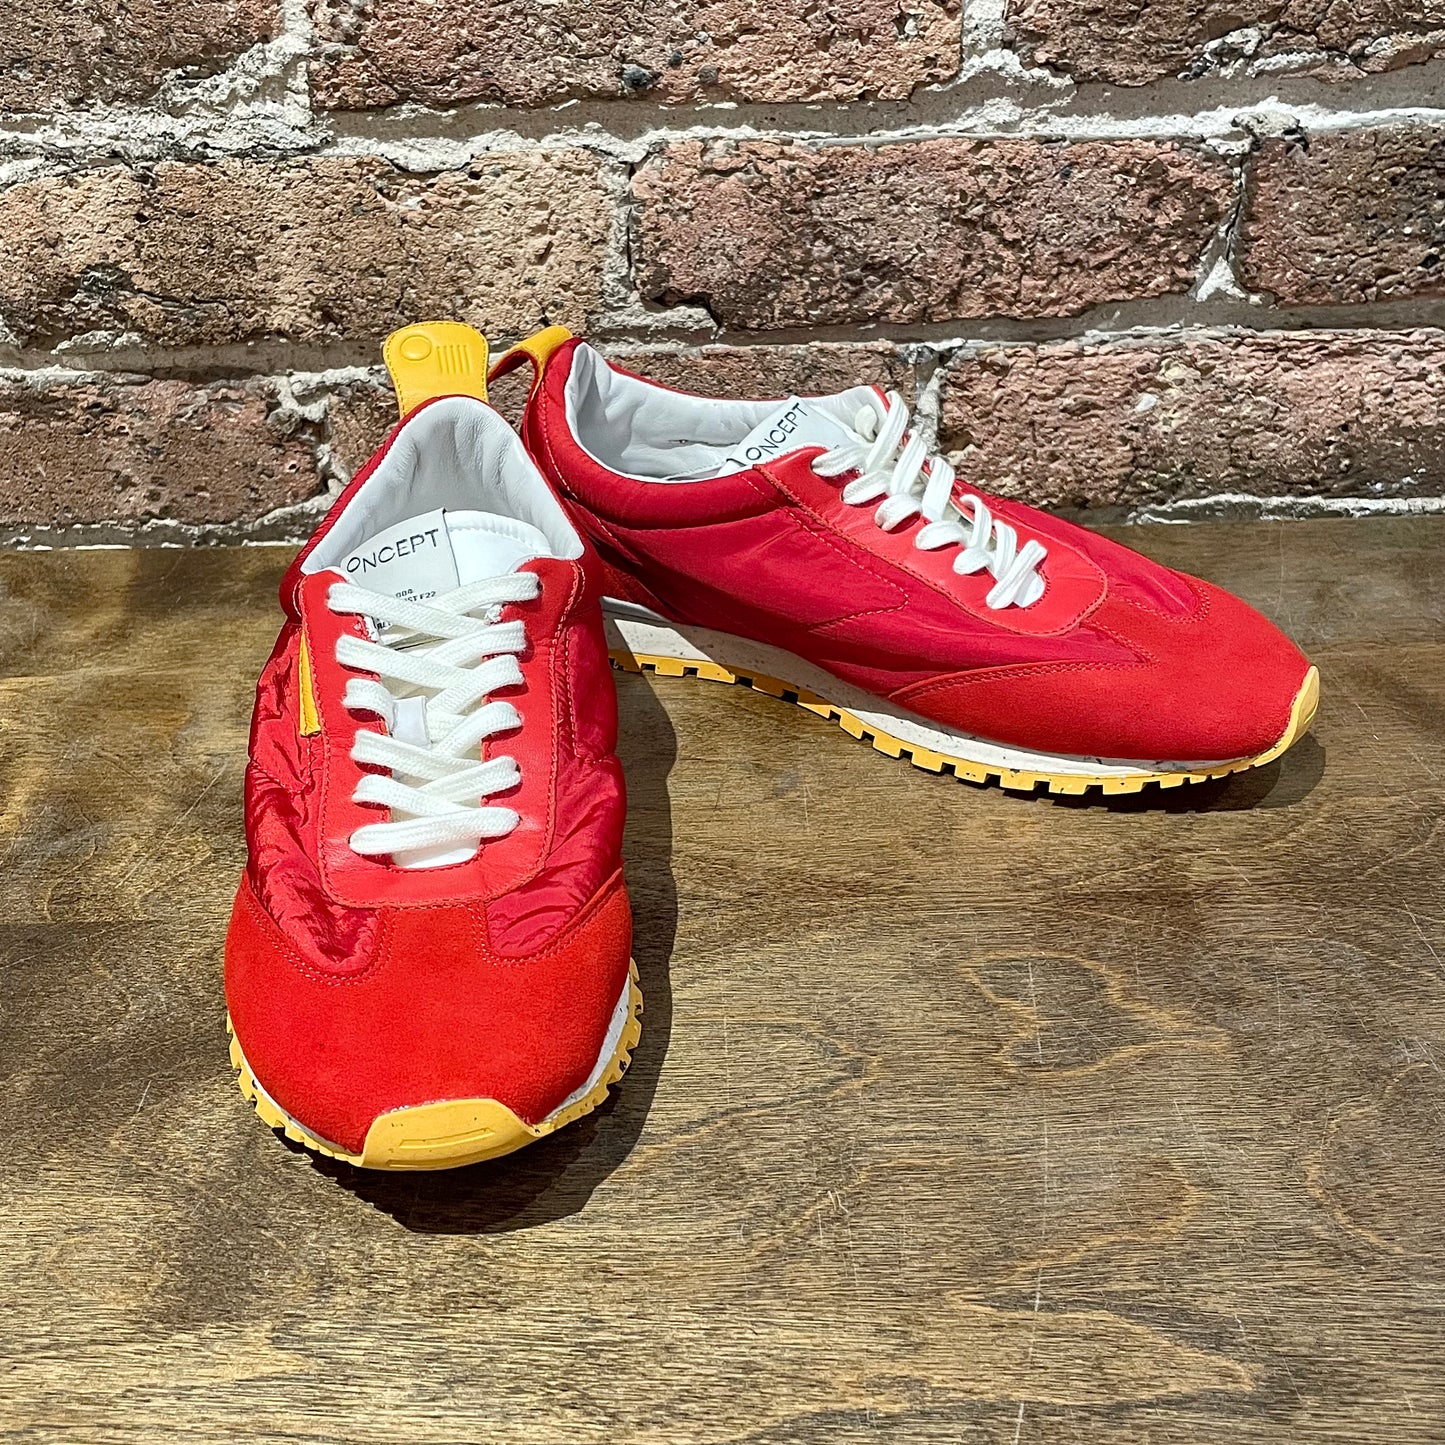 Oncept Tokyo Retro Red